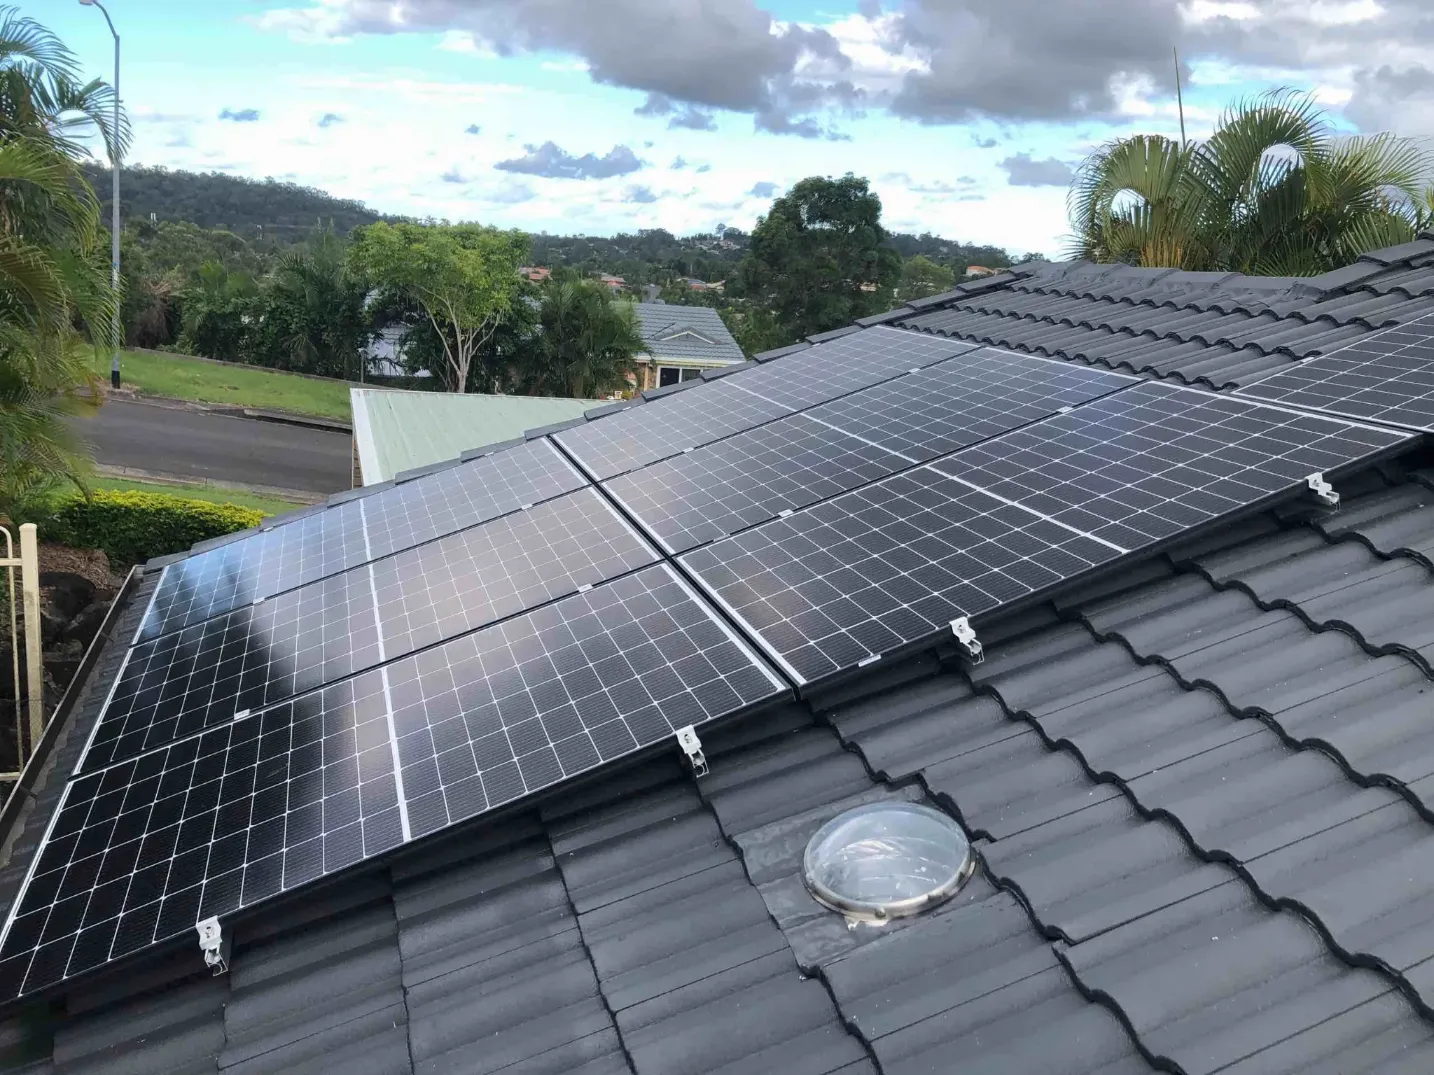 CEC Approved Solar Retailer - DE Energy Residential solar system Project